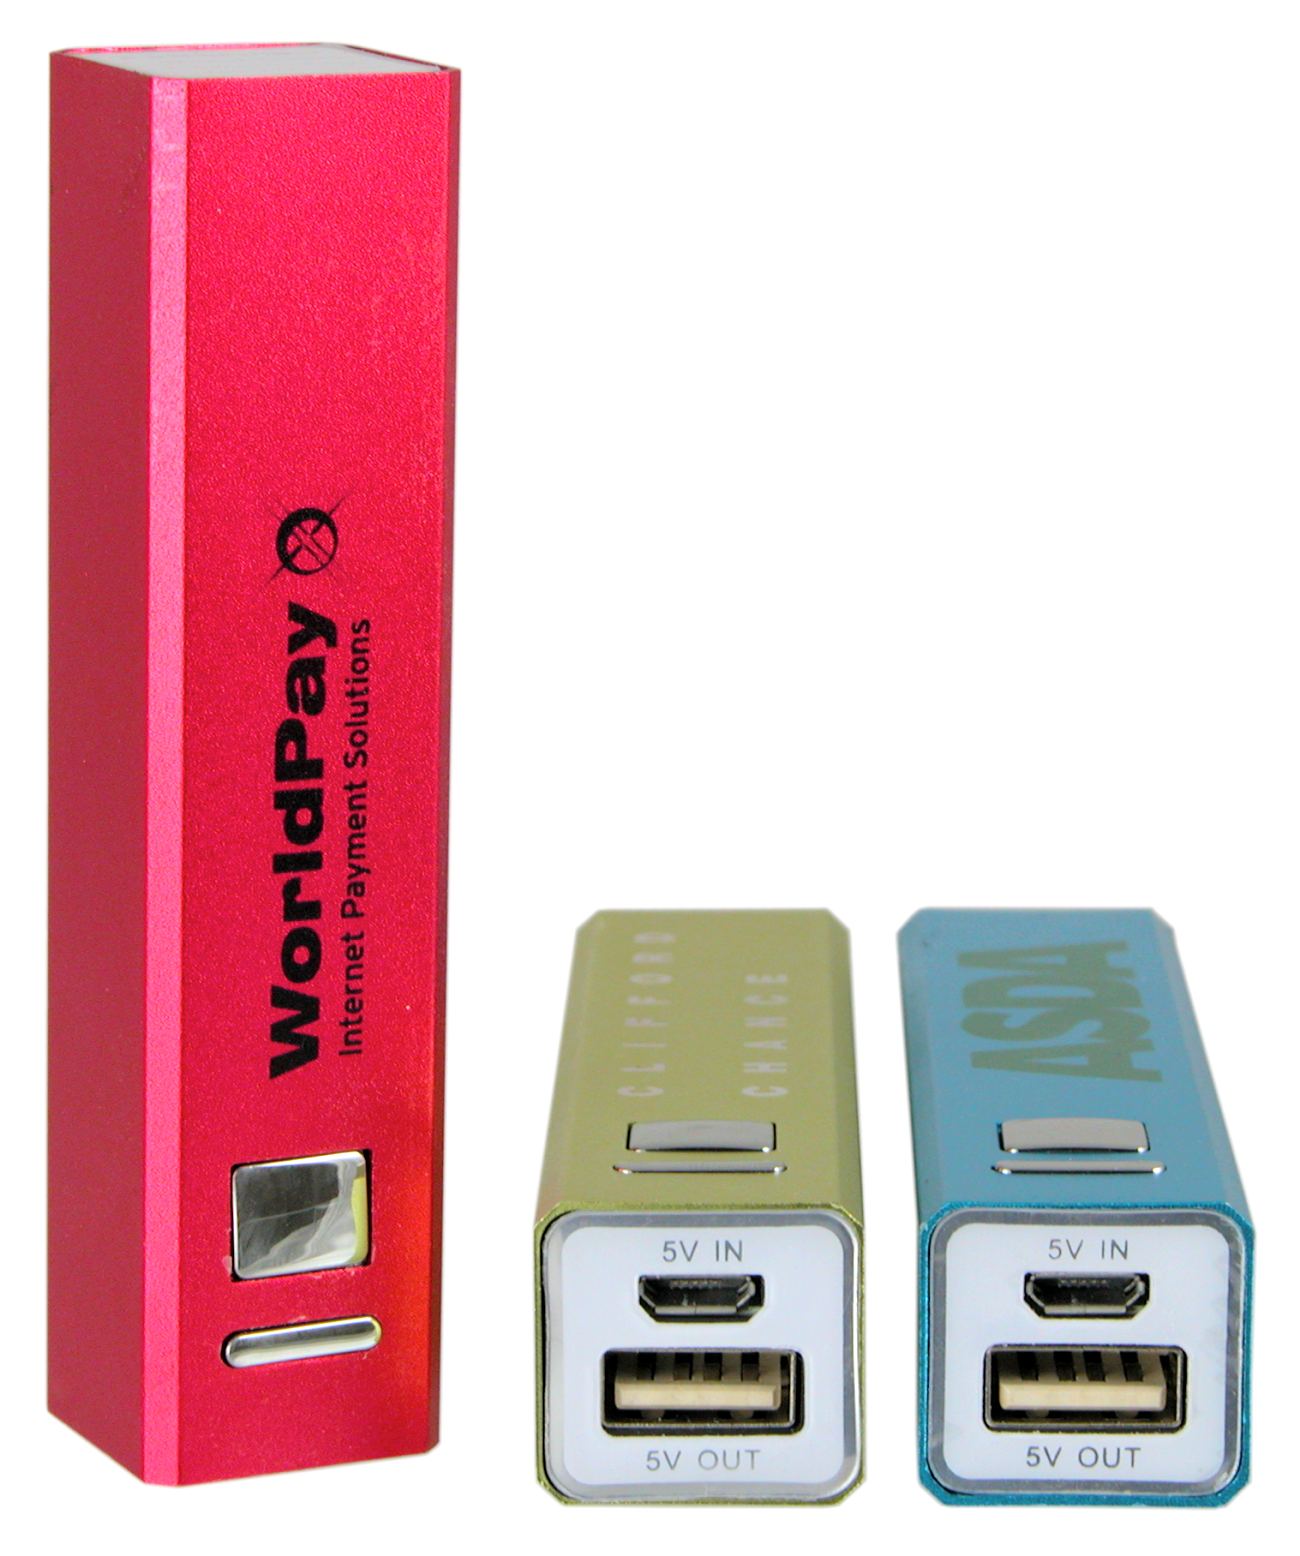 Three power bank chargers with a rectangular metal case